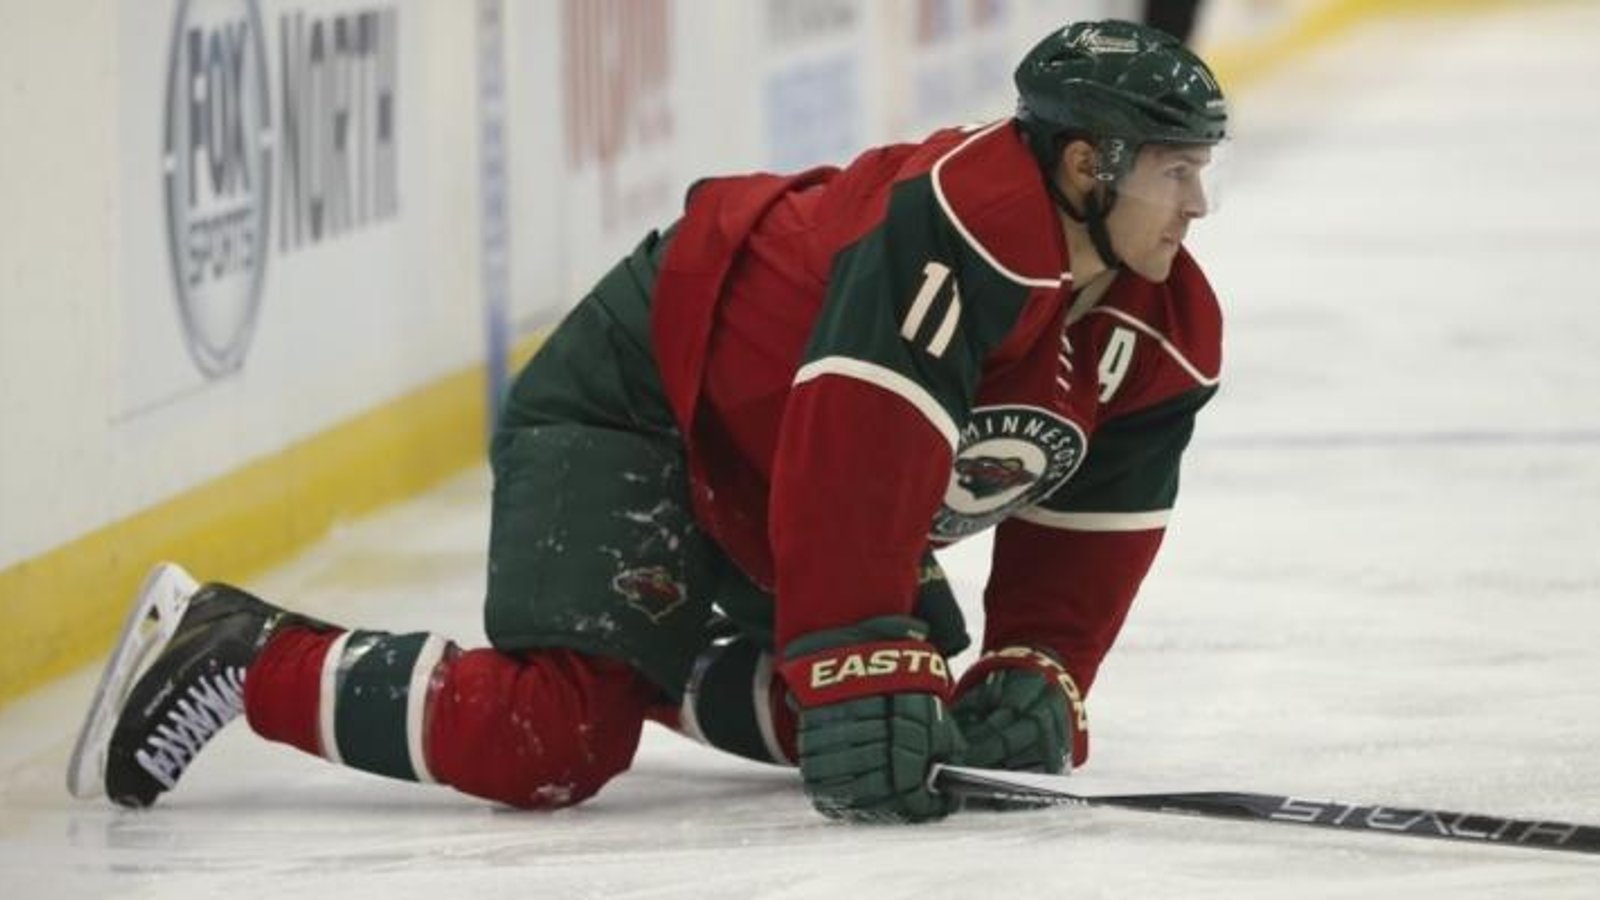 Zach Parise reveals if he will play in the World Cup.